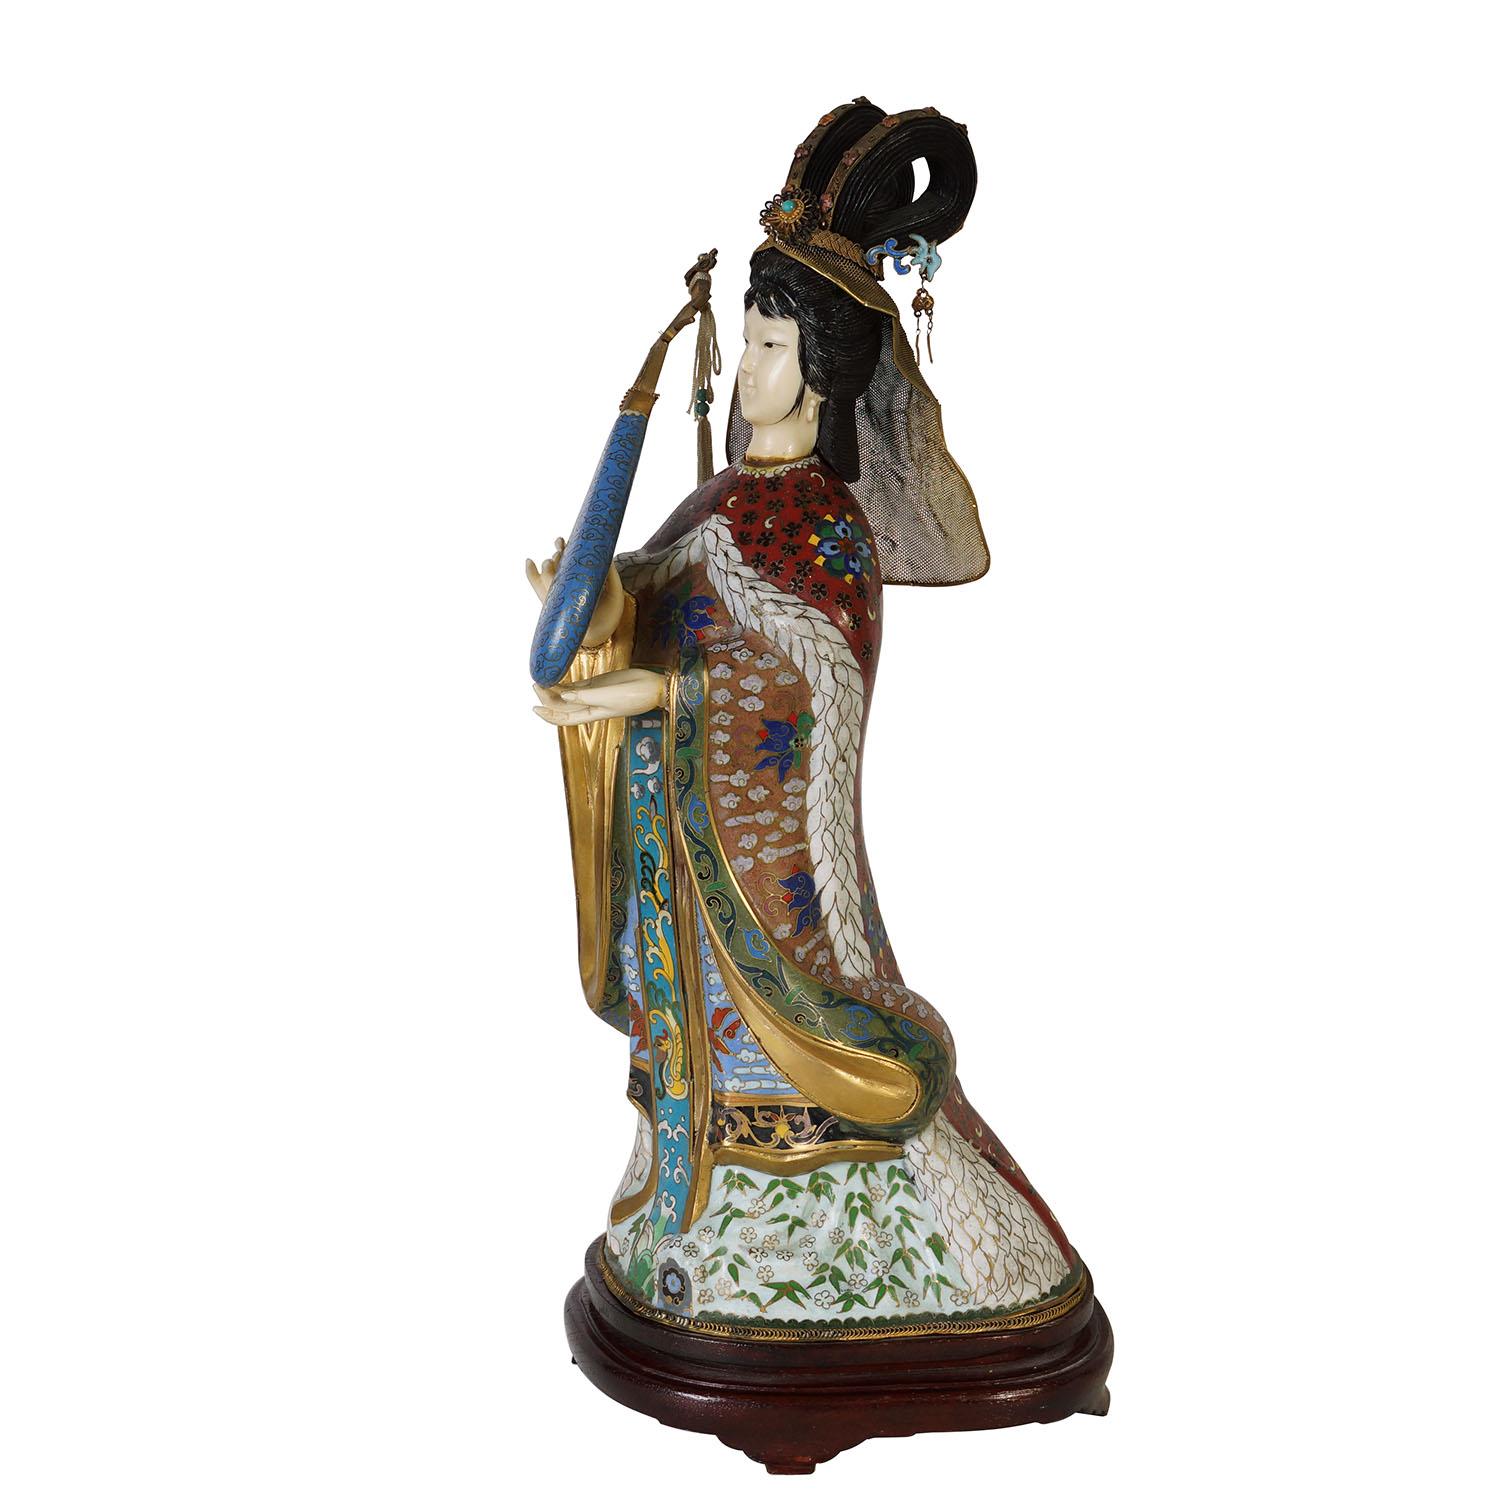 Cloissoné 20th Century Chinese Antique Cloisonne Figurine with Musical Instrument For Sale